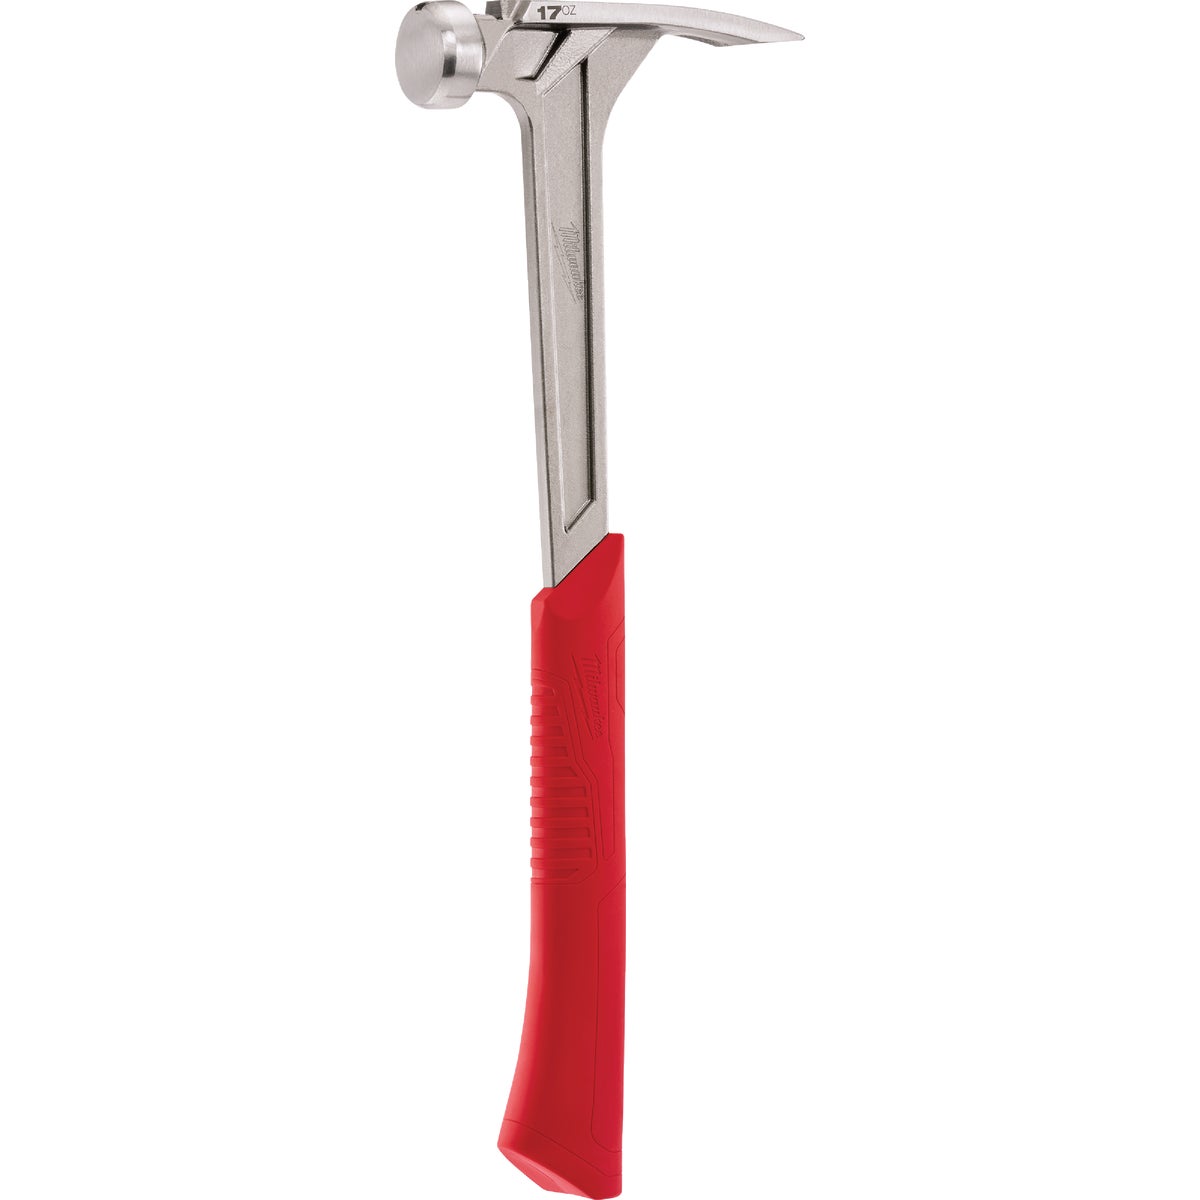 Milwaukee 17 Oz. Smooth-Face Framing Hammer with Steel I-Beam Handle